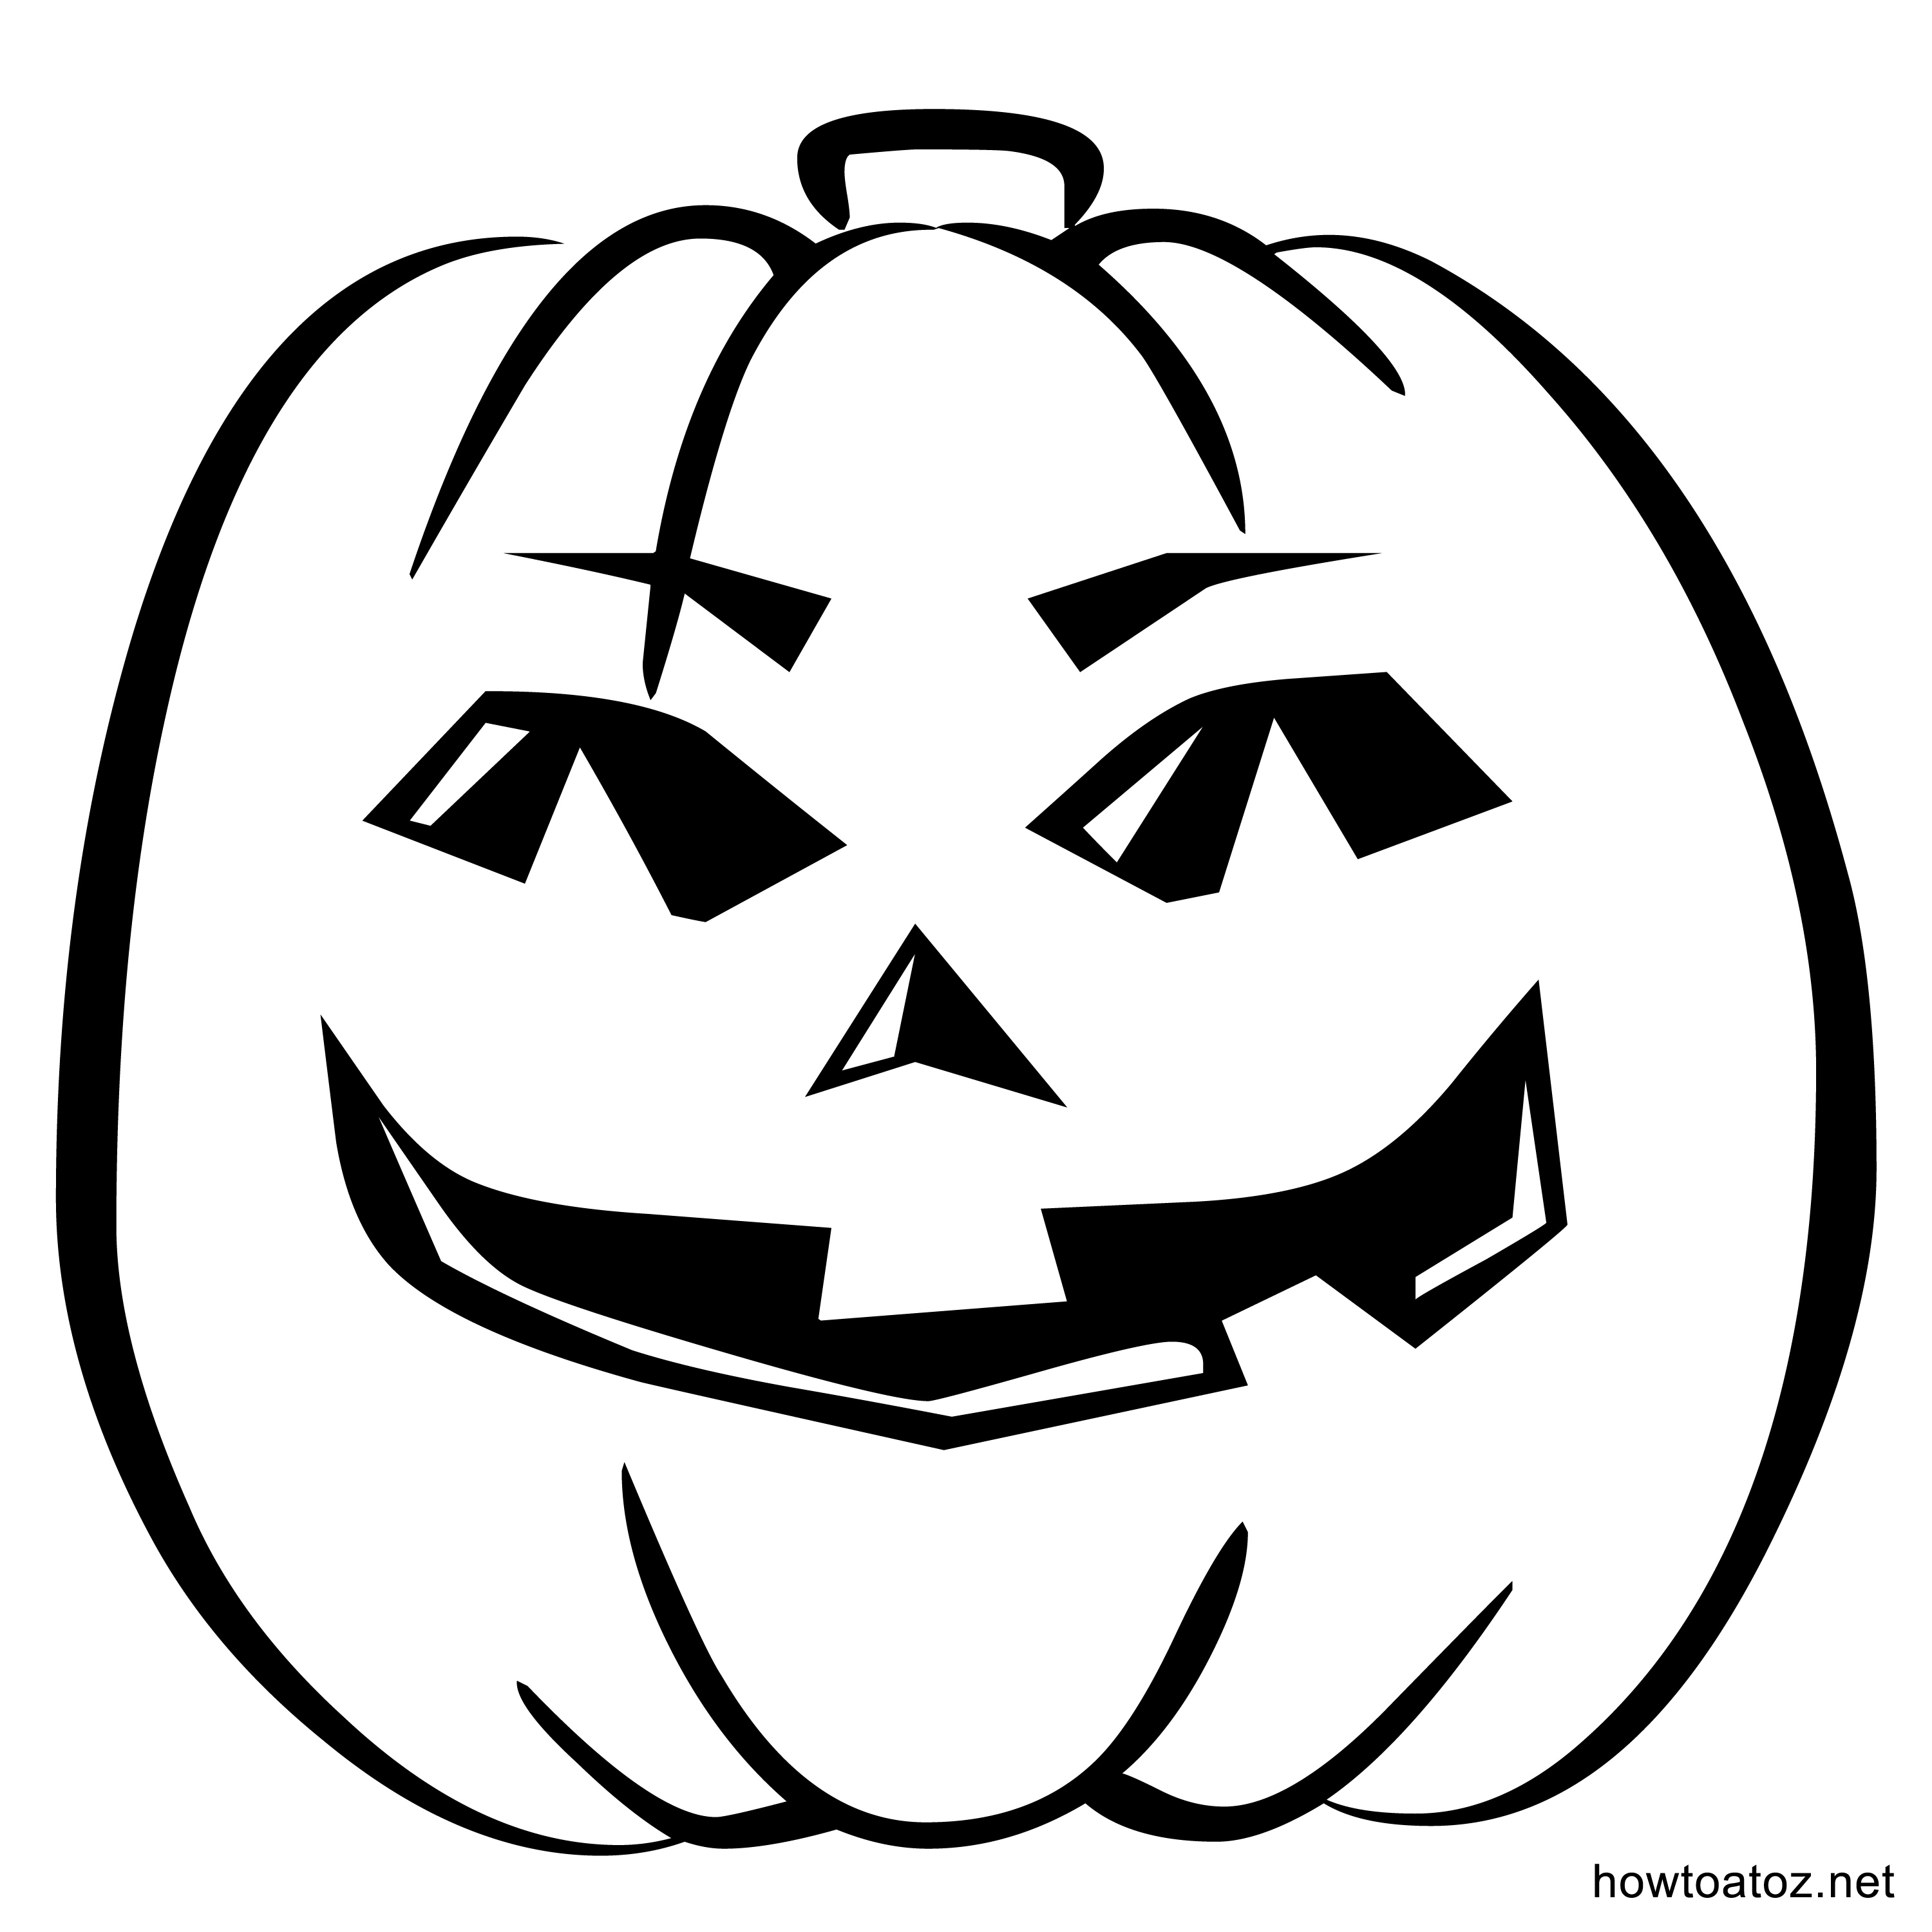 Free Halloween decoration Stencils And Templates - How to A to Z